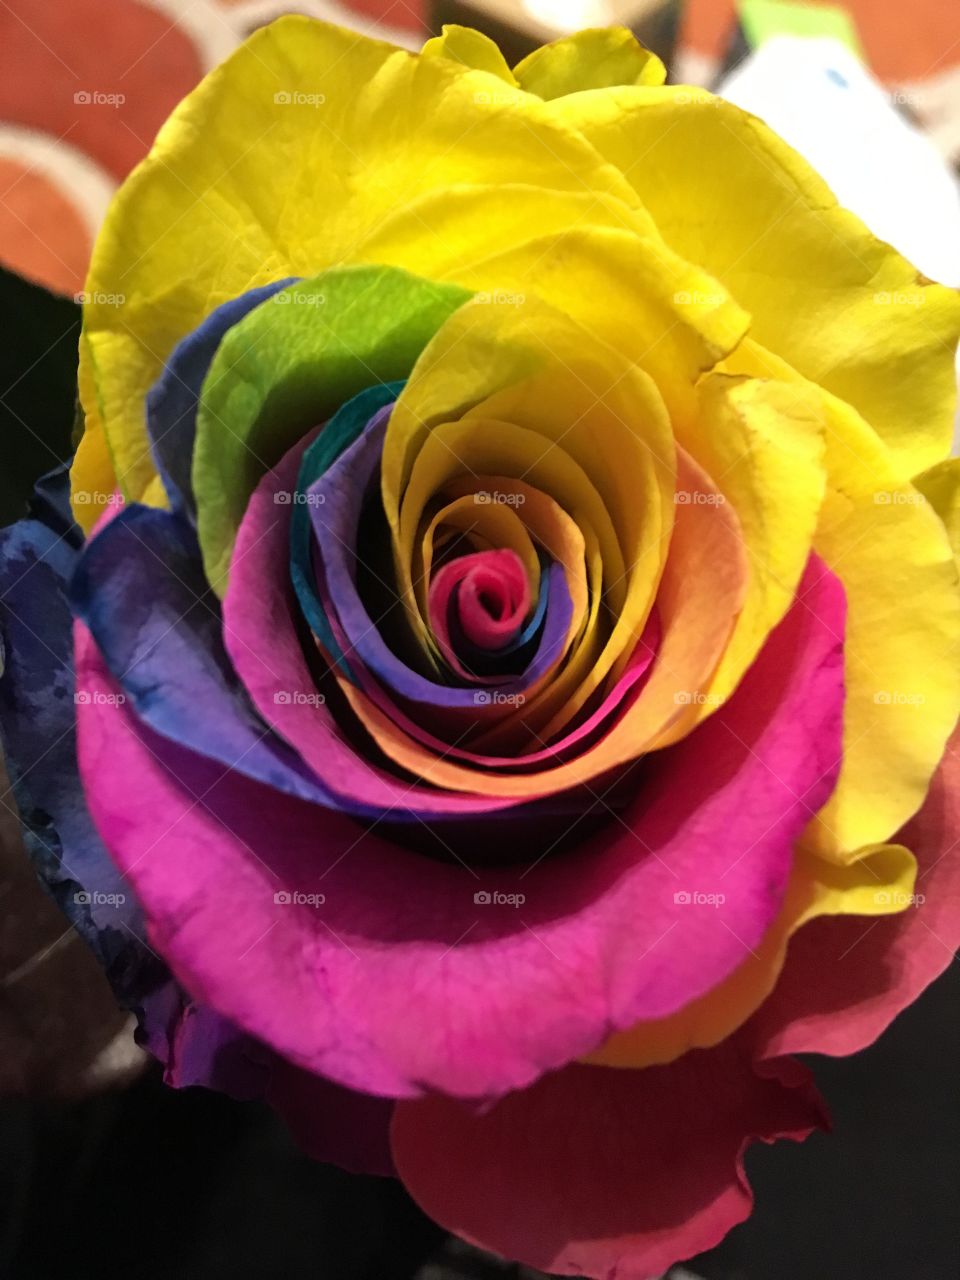 My Beautiful Rainbow Rose, chosen for me by the one I love.